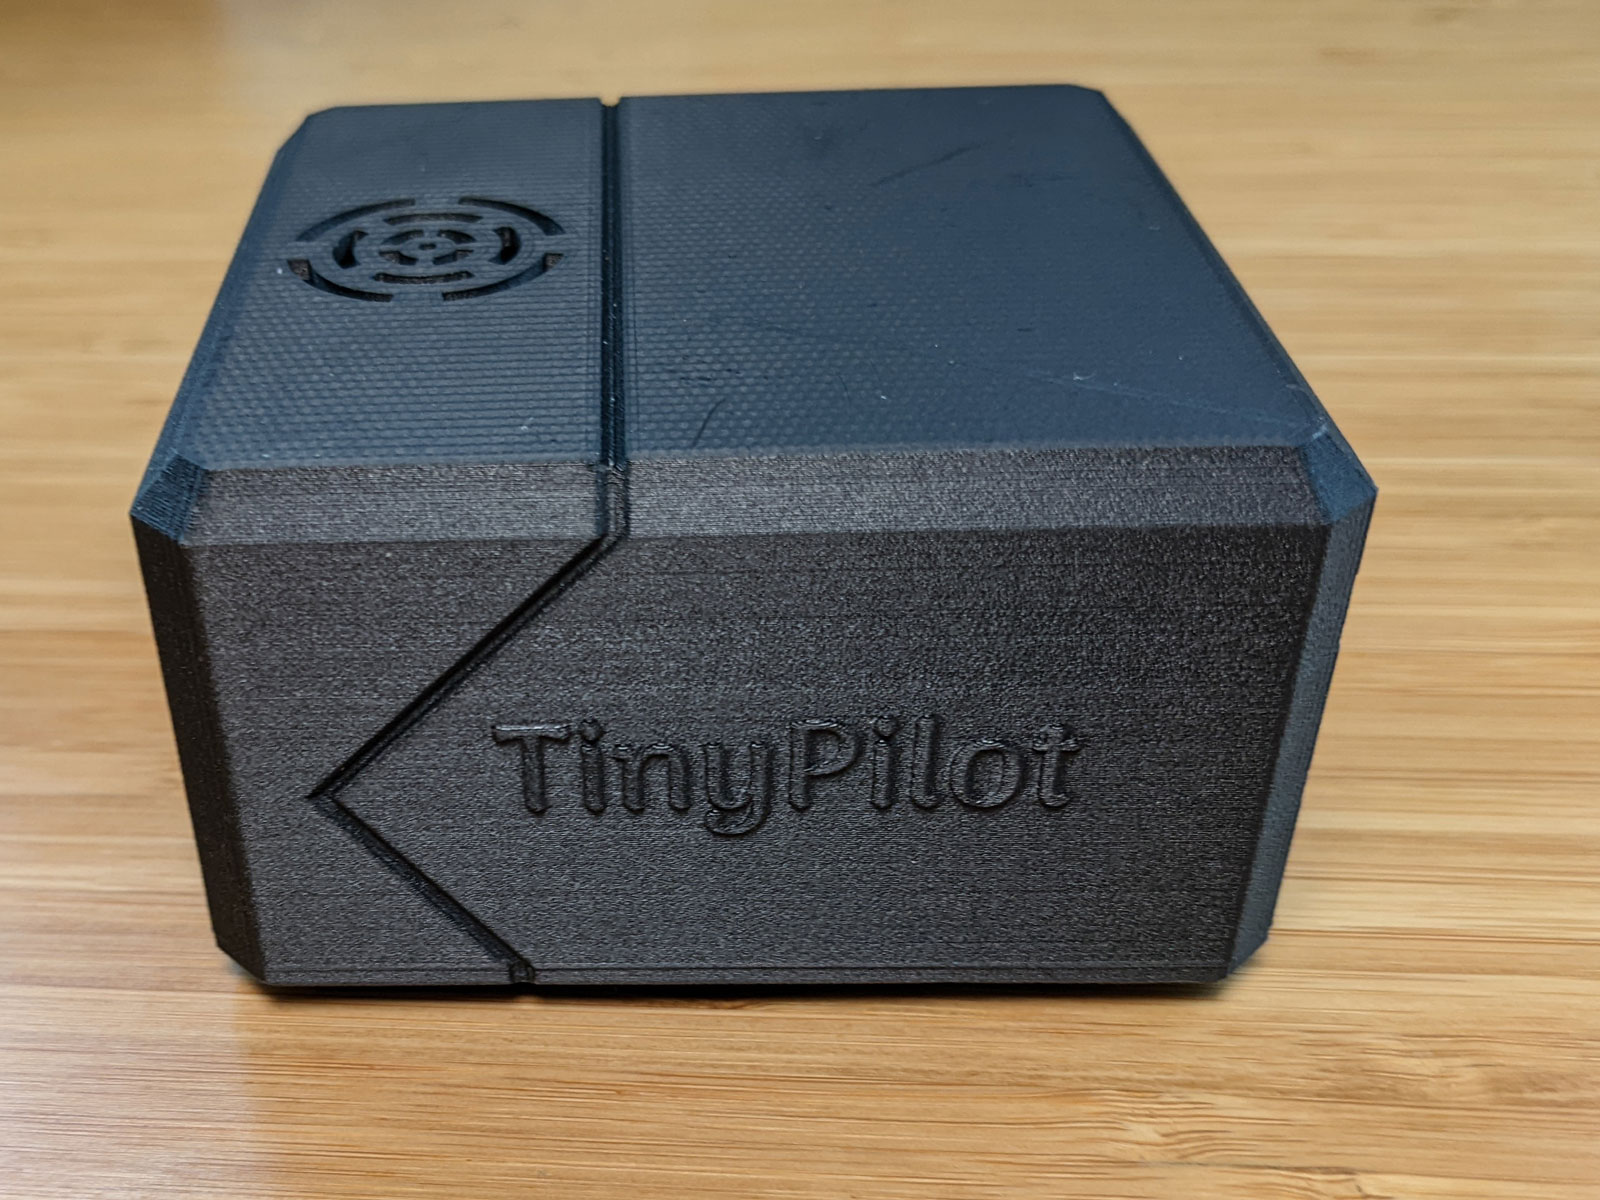 Photo of TinyPilot Voyager from the side with TinyPilot brand name showing